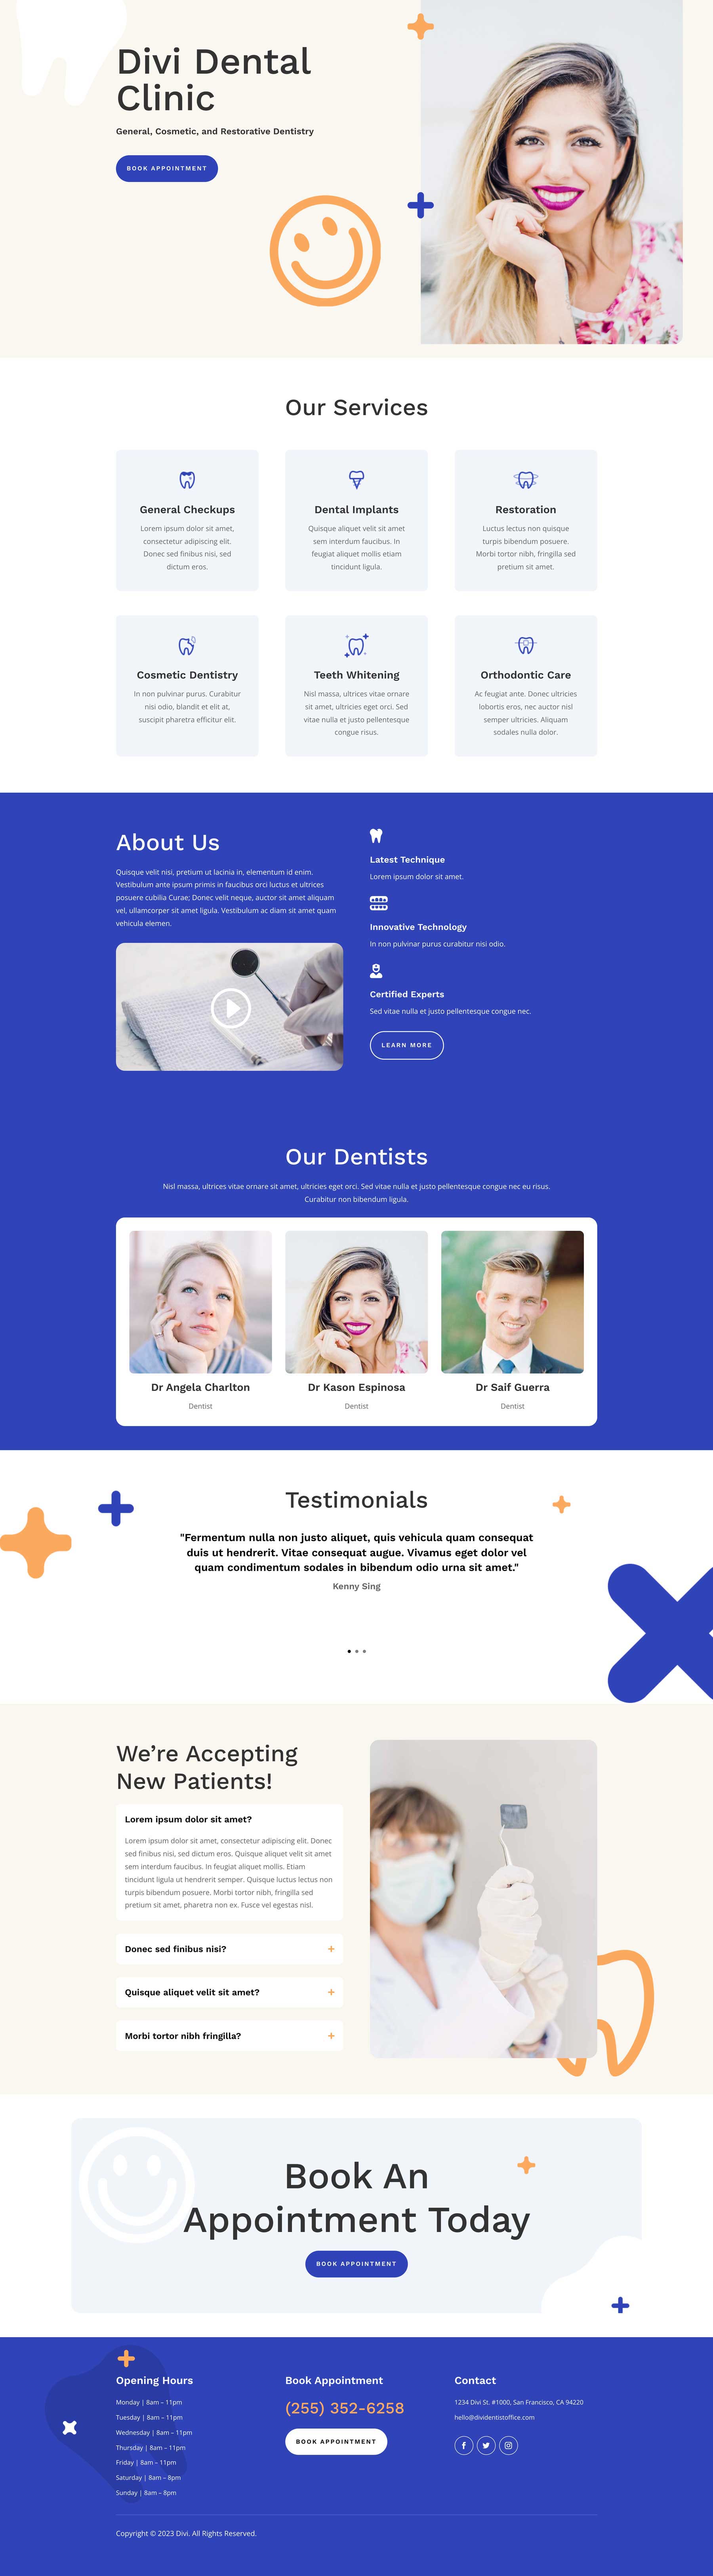 Dental Office layout pack